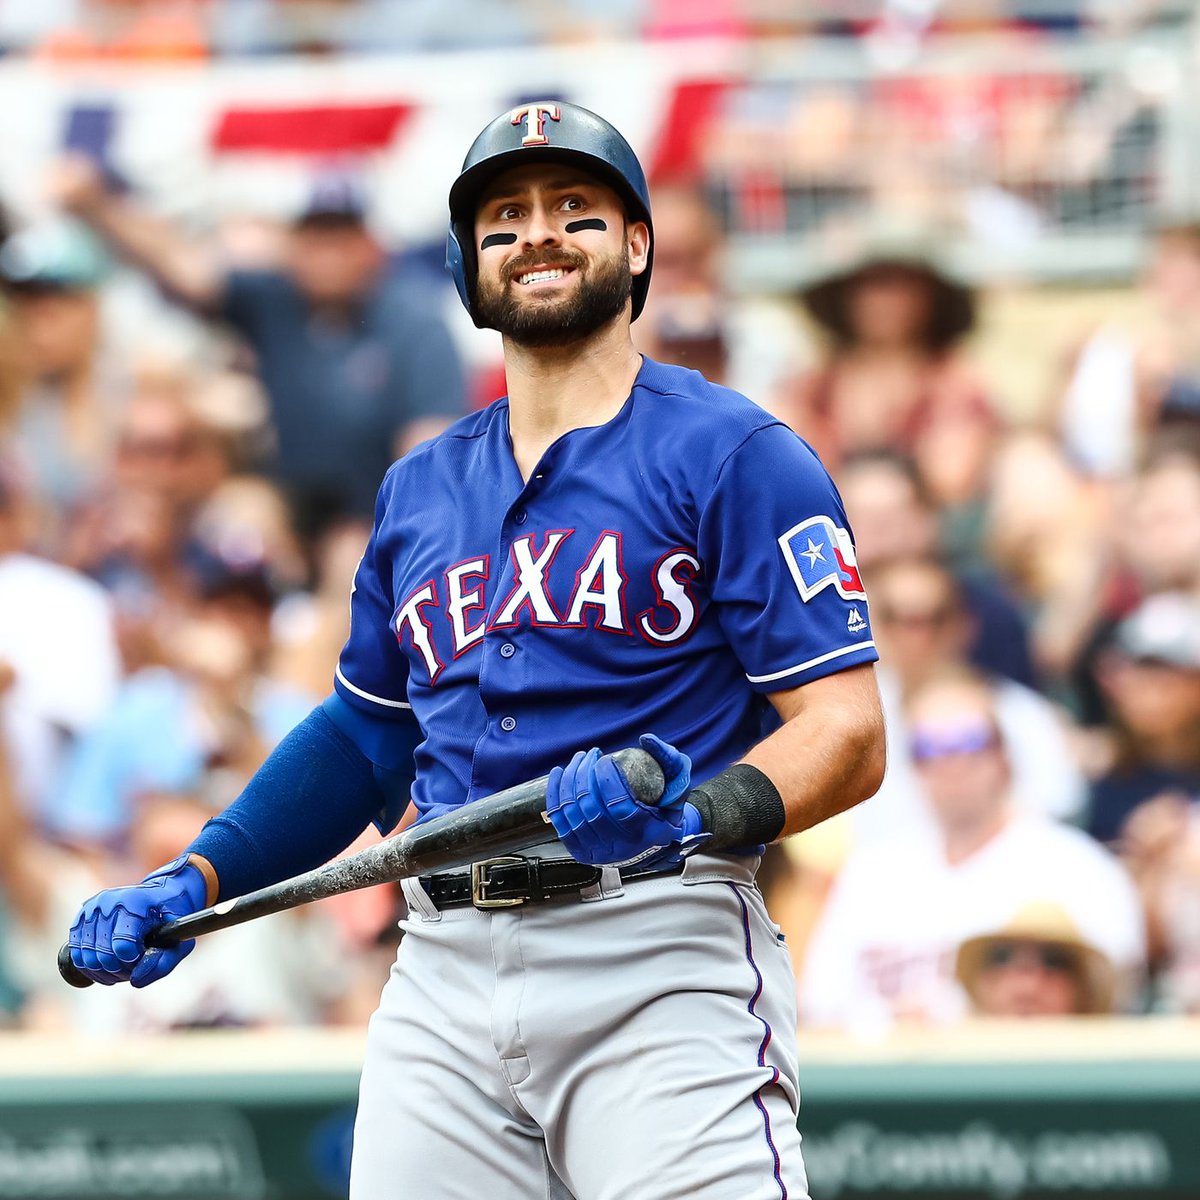 For an example of this, let's look at Rangers OF Joey Gallo.His 2019 AVG was .253 (61 for 241) which would tell you he's pretty mediocre.However, Gallo also had 52 walks in just 297 PAs, plus two hit by pitches, and hit one sac fly.His OBP, then? .389 #BaseballTerms101